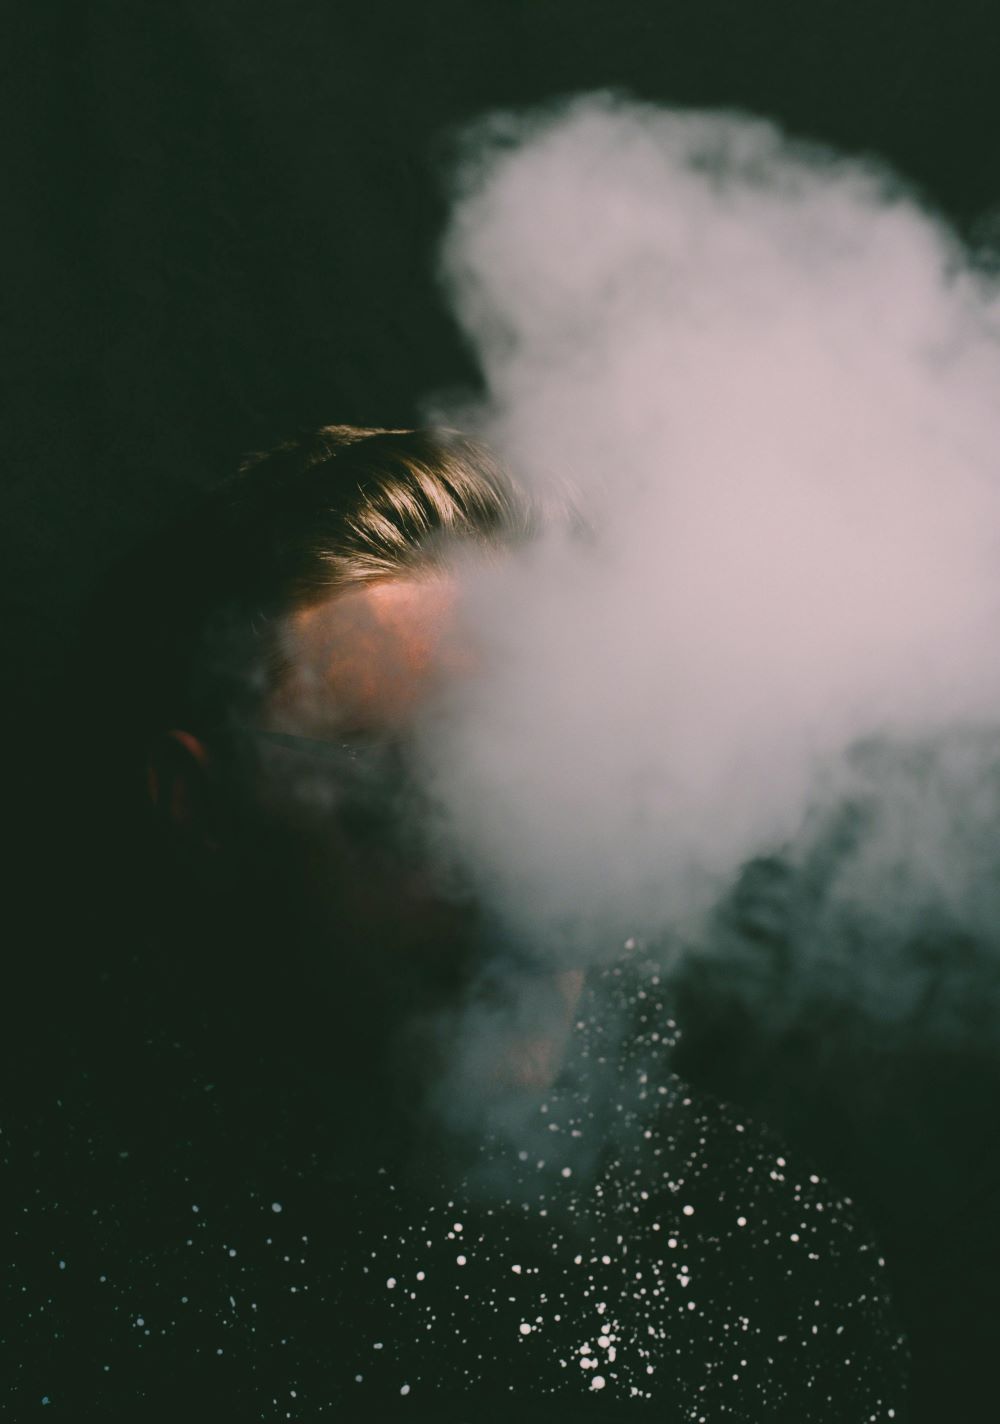 Study Finds E-Cigarettes & Vaping May Impact Mental Health